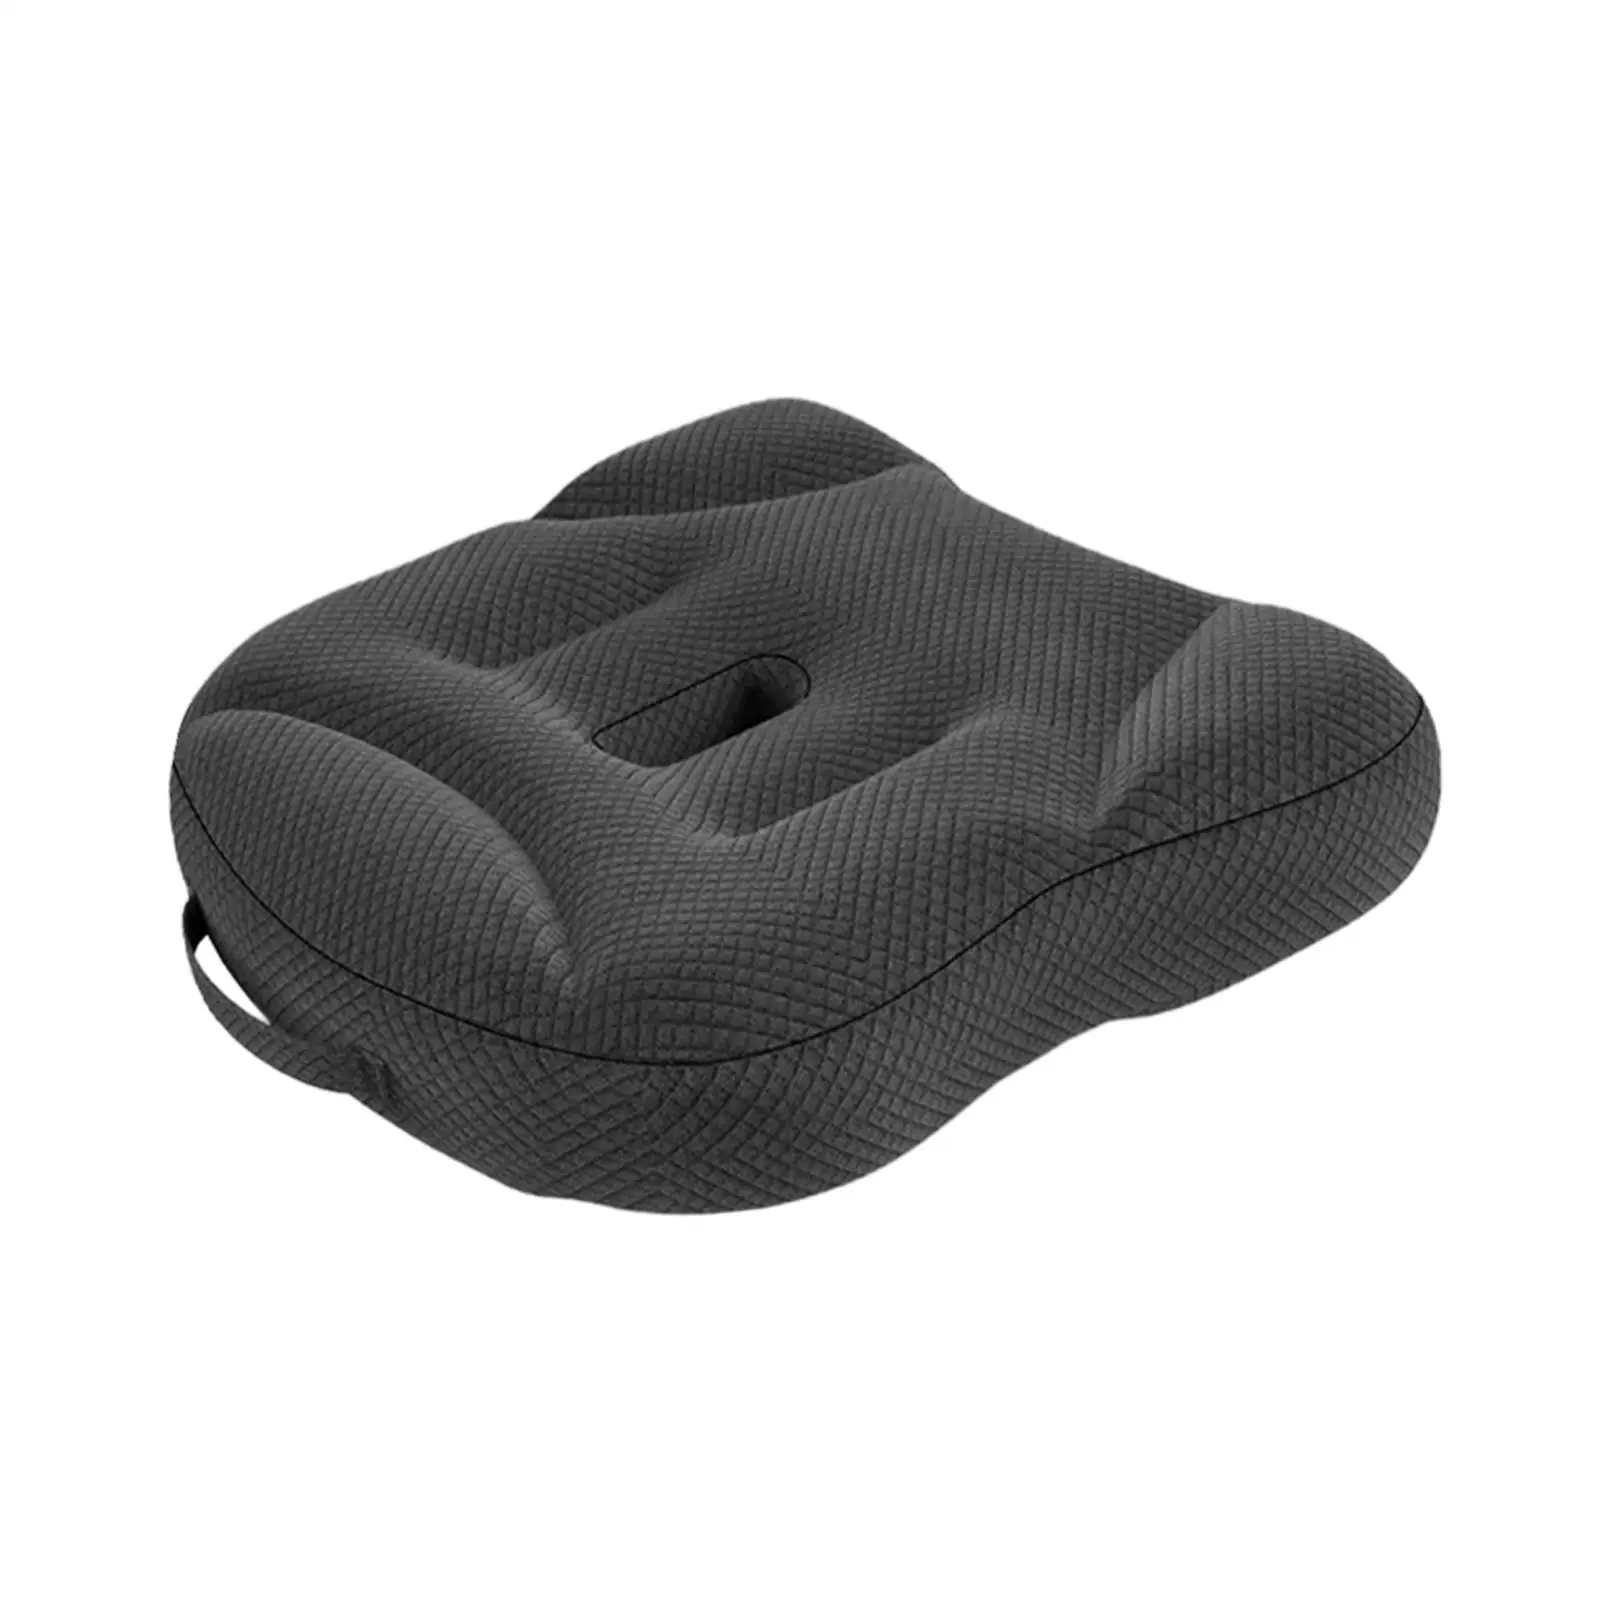 Seat Cushion Pillow Anti Slip Washable Soft Office Chair Cushions Car Seat Cushions Seat Pad for Office Home Traveling Car